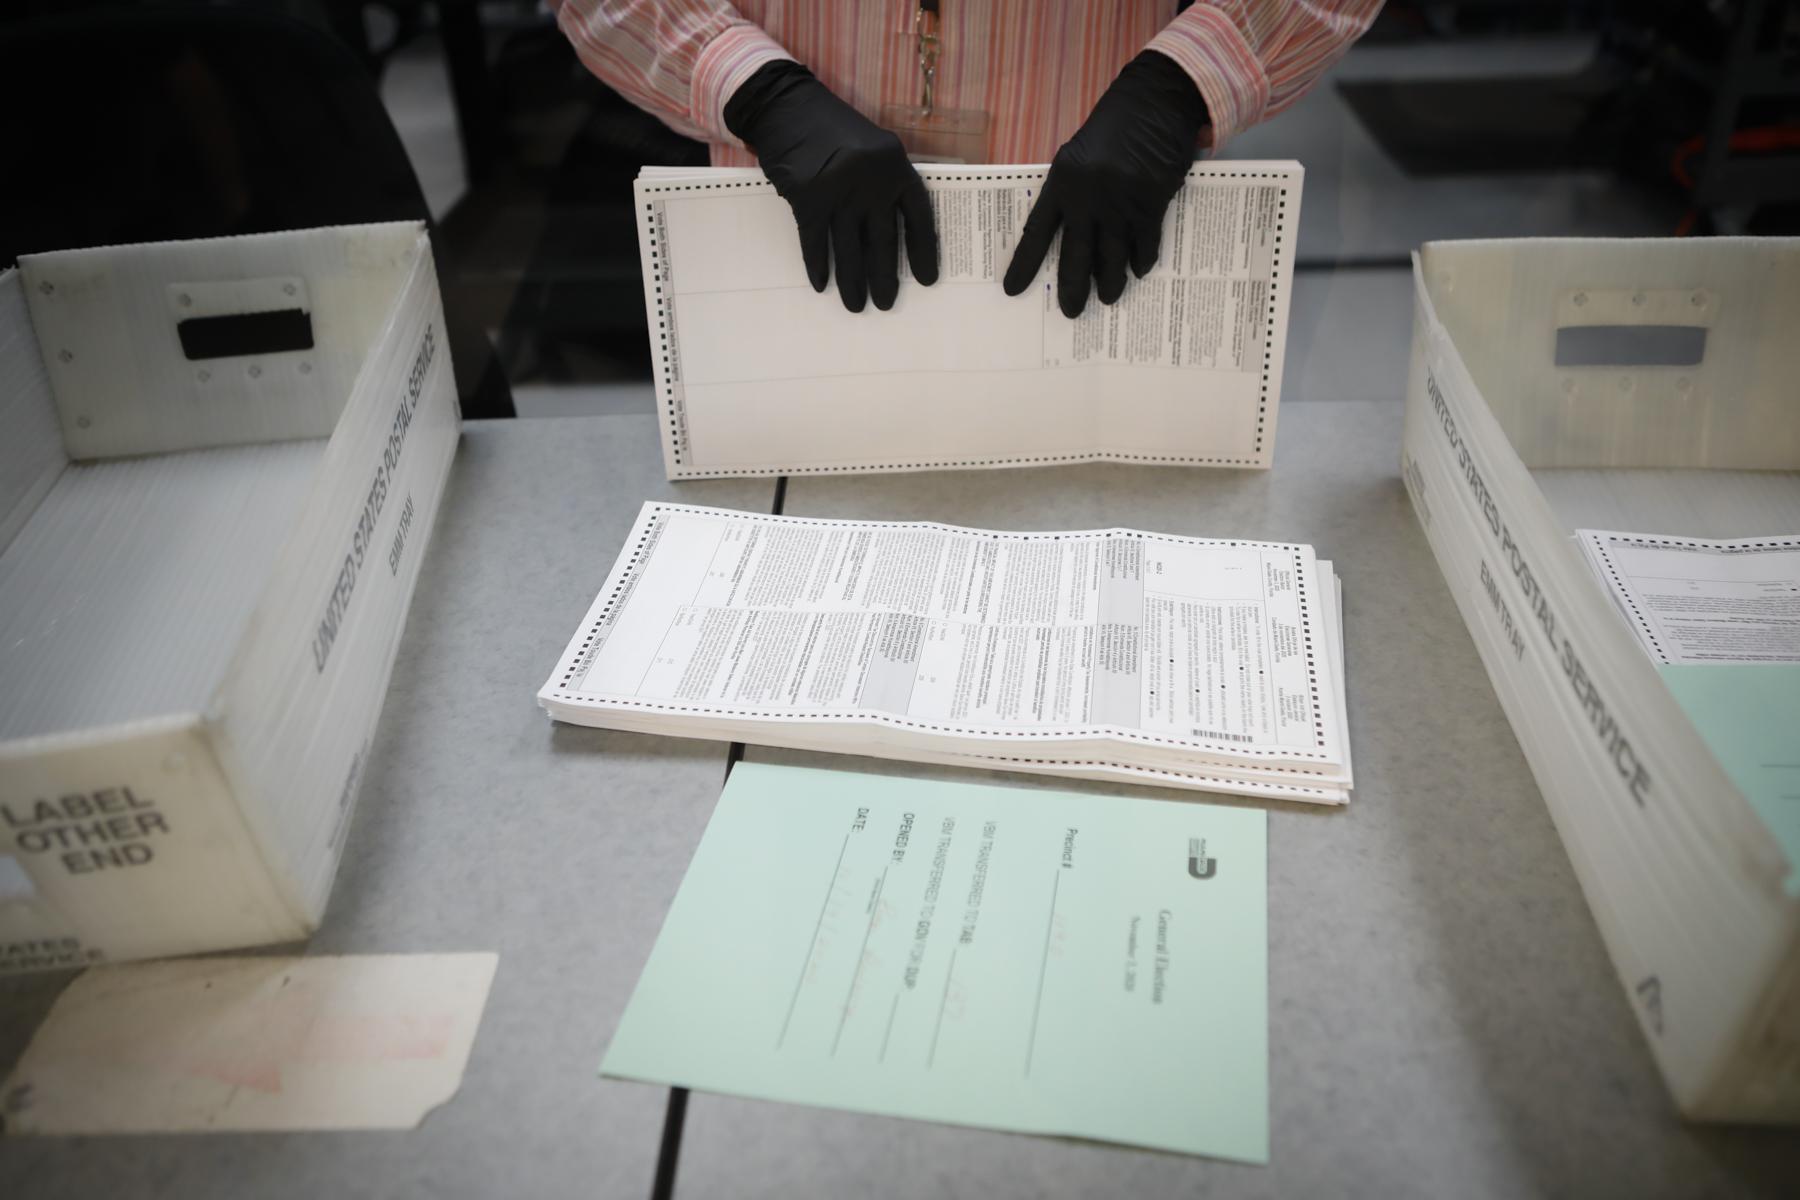 Election 2020 @ Miami, FL - An electoral worker organizes vote-by-mail ballots at...